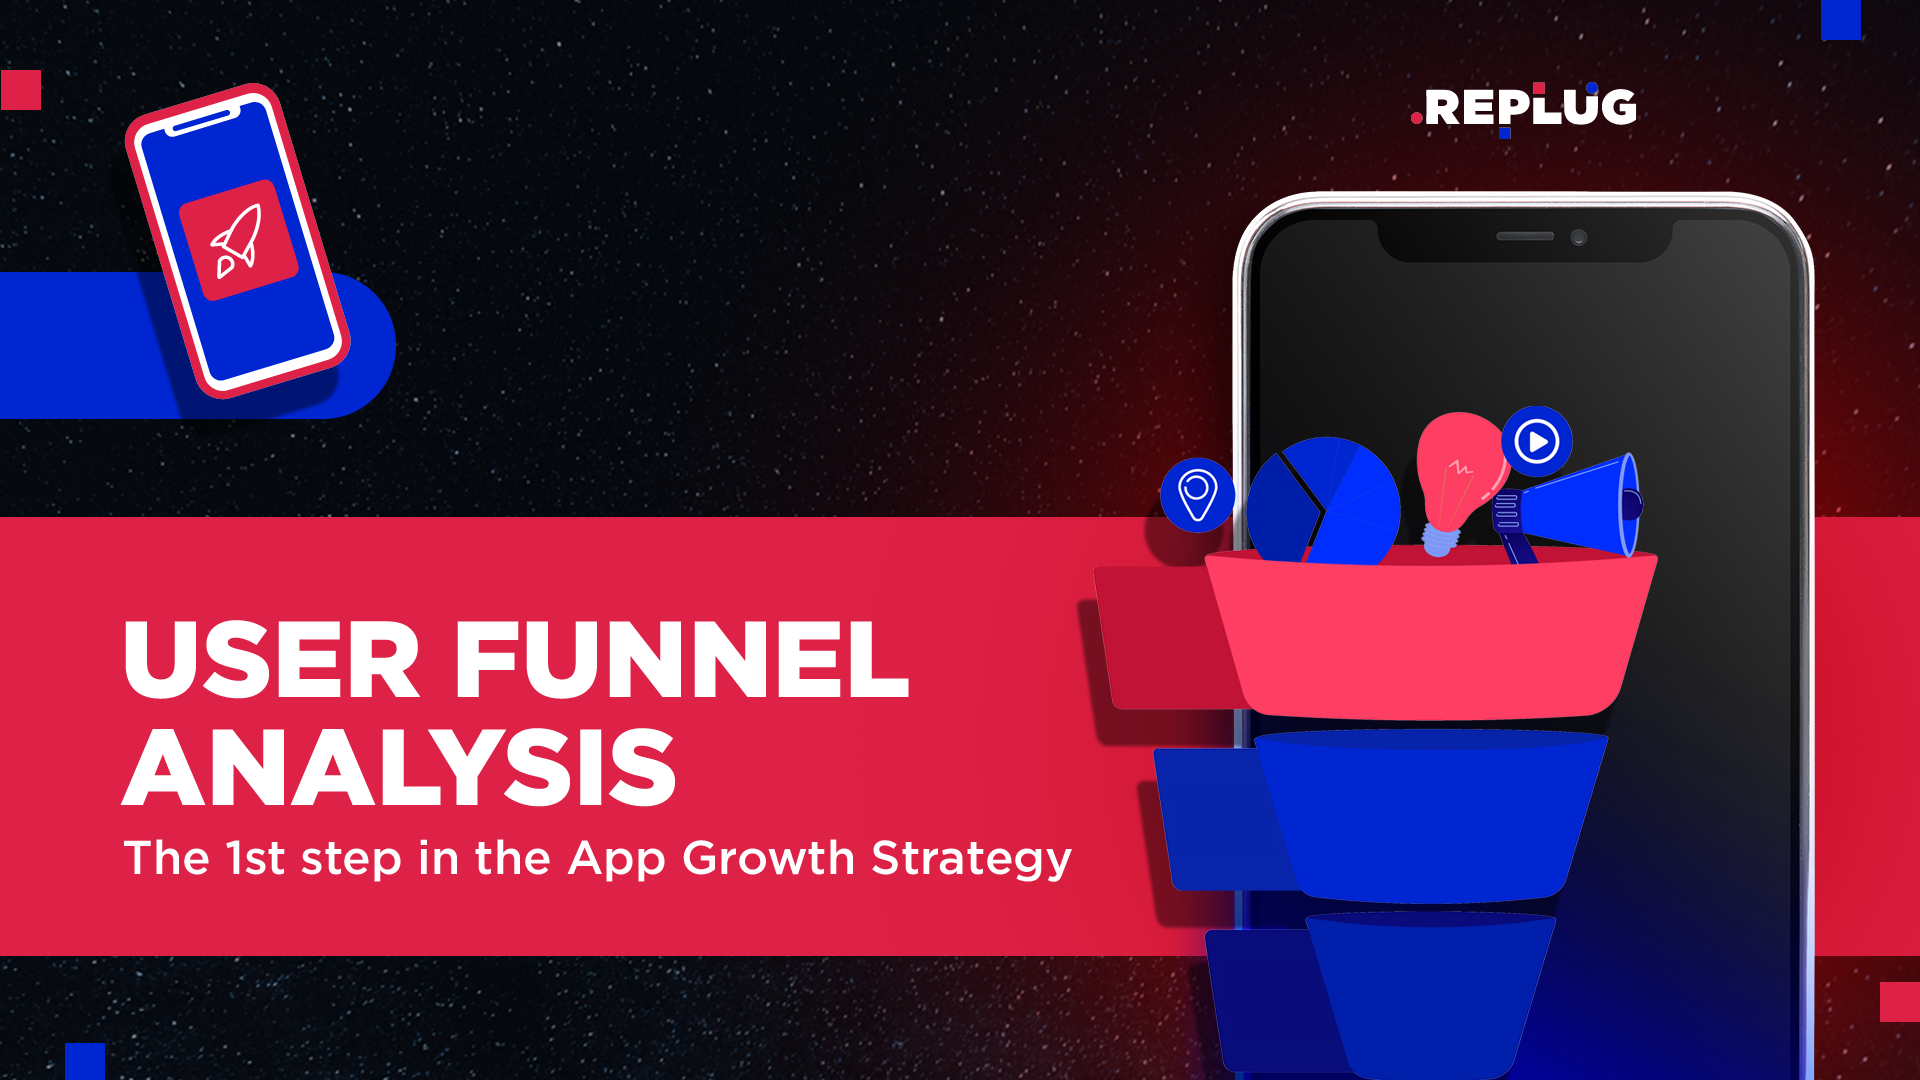 user funnel analysis for app growth strategy